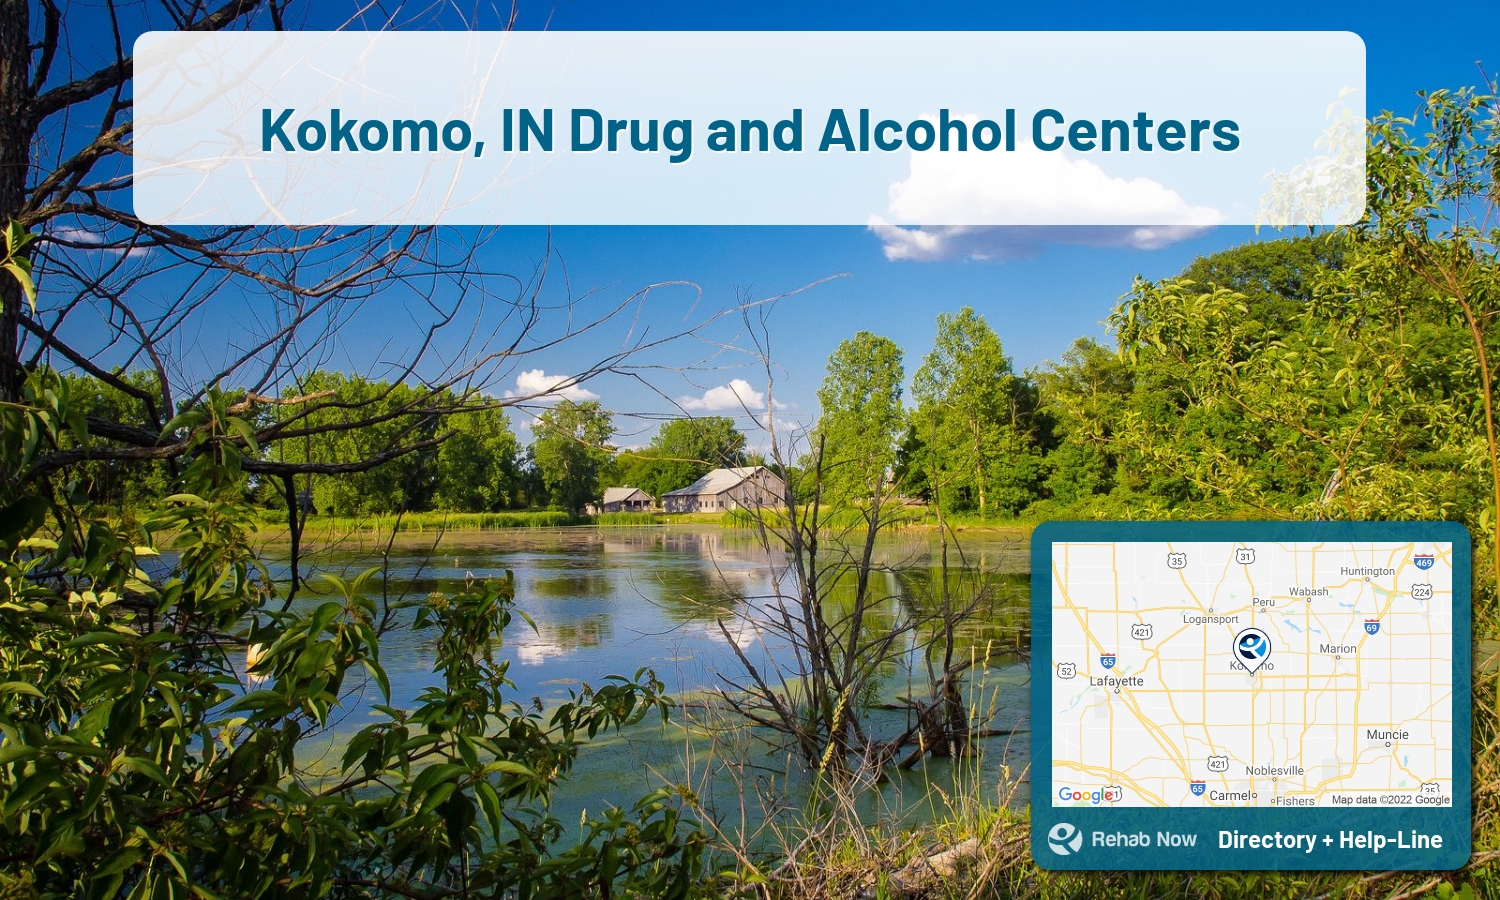 Those struggling with addiction can find help through addiction rehab facilities in Kokomo, IN. Get help now!